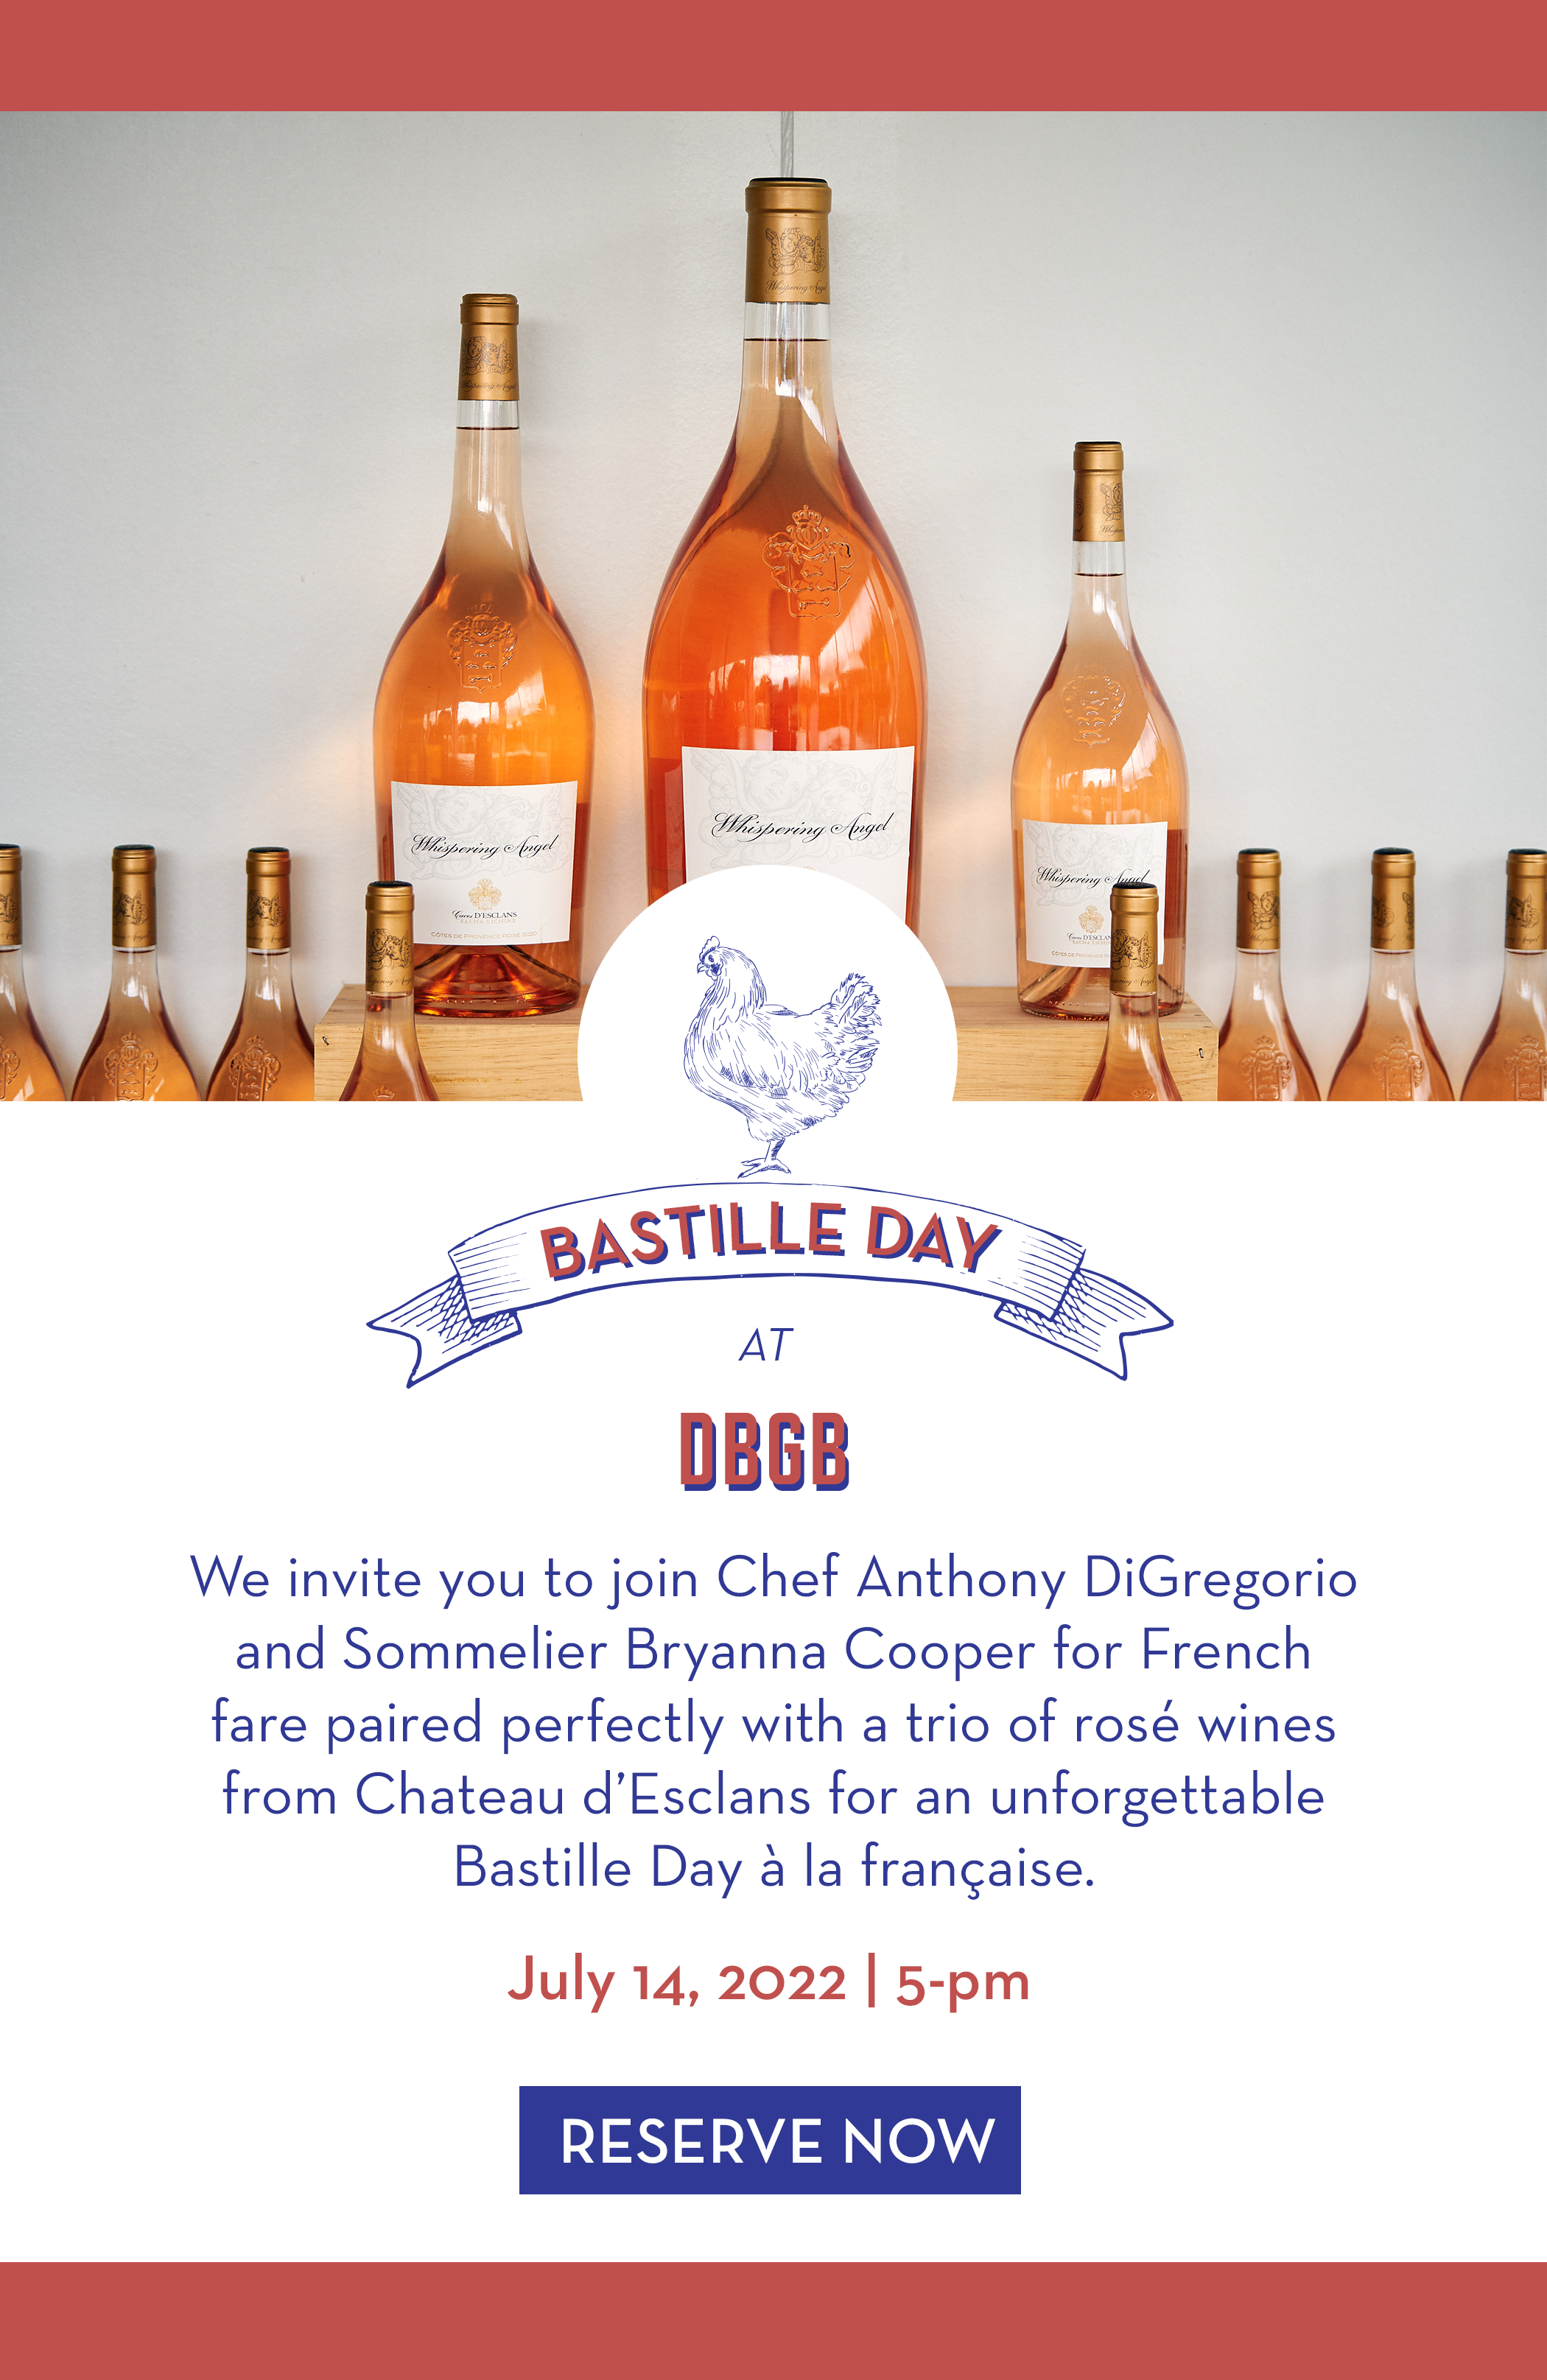 Bastille Day at DBGB We invite you to join Chef Anthony DiGregorio and Sommelier Bryanna Cooper for French fare paired with a trio of rosé wines for an unforgettable Bastille Day à la française this Thursday, July 14th at 5pm.